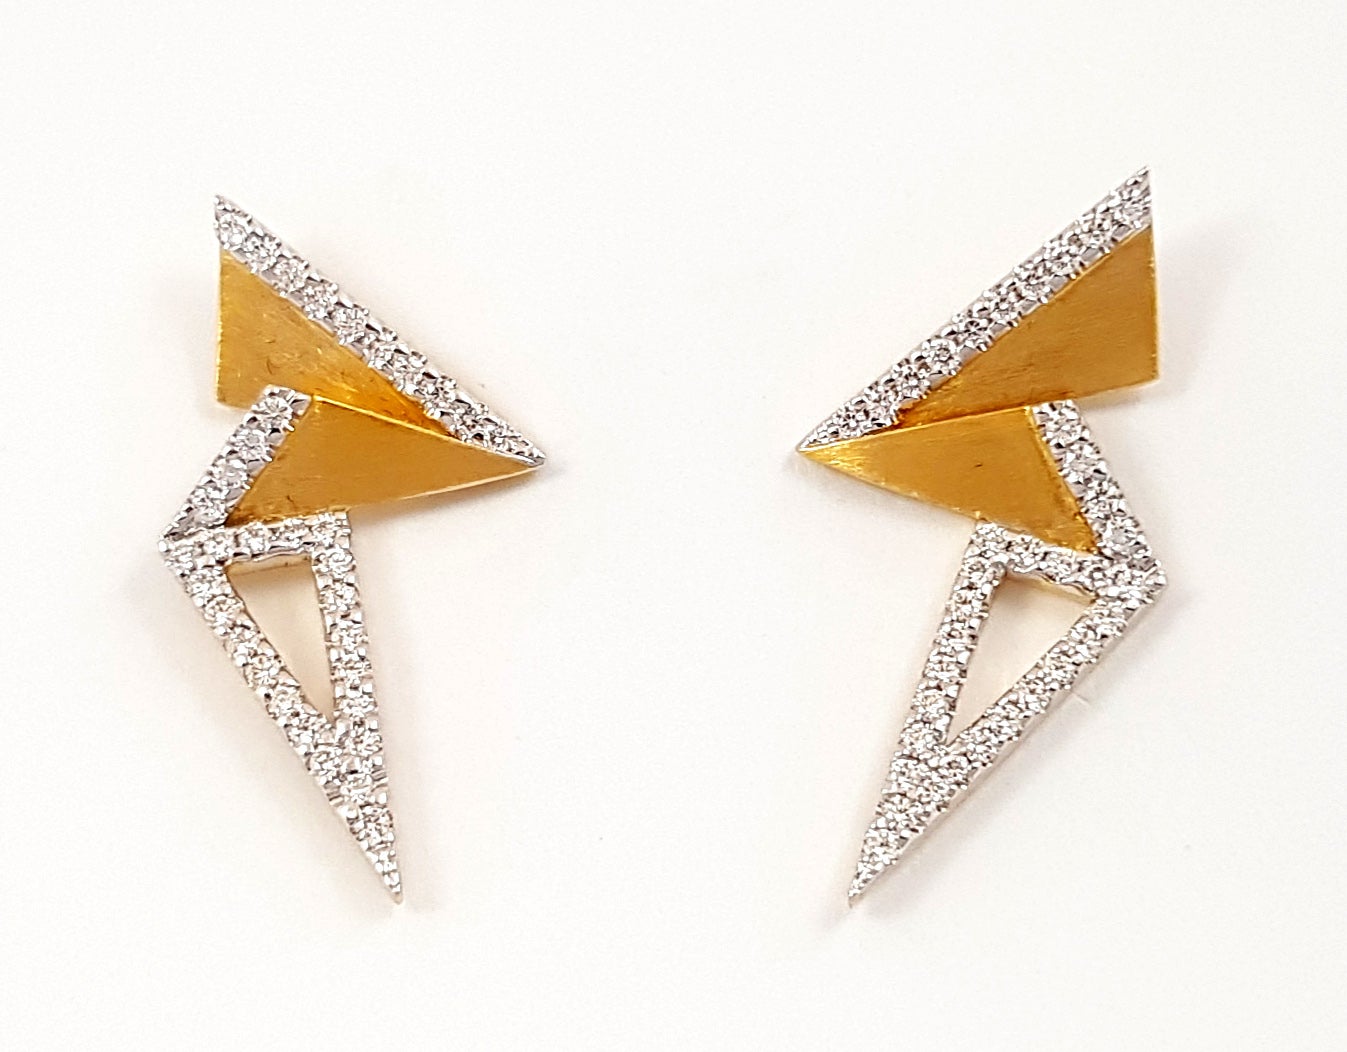 Diamond 0.69 carat Earrings set in 18K Gold Settings


Width: 1.5 cm
Length: 3.0 cm
Weight: 7.38 grams

The ancient Japanese tradition of paper folding has inspired the form and elements of this modern collection. With a series of folds and pleats,